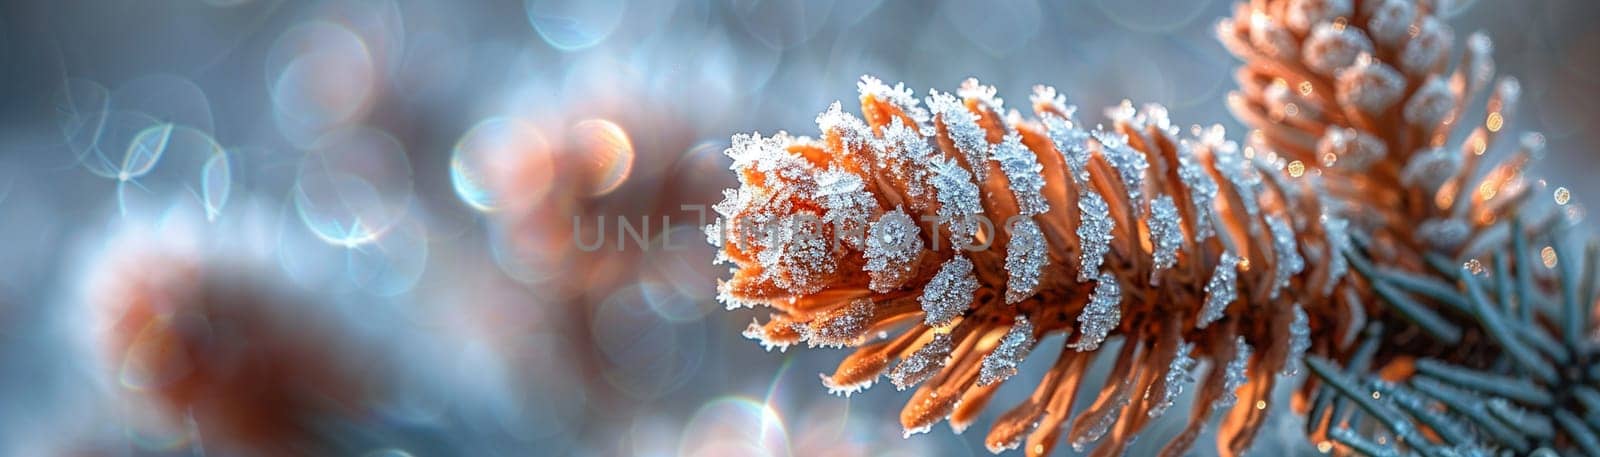 Macro shot of frost on a pine cone, showcasing winter's intricate details.